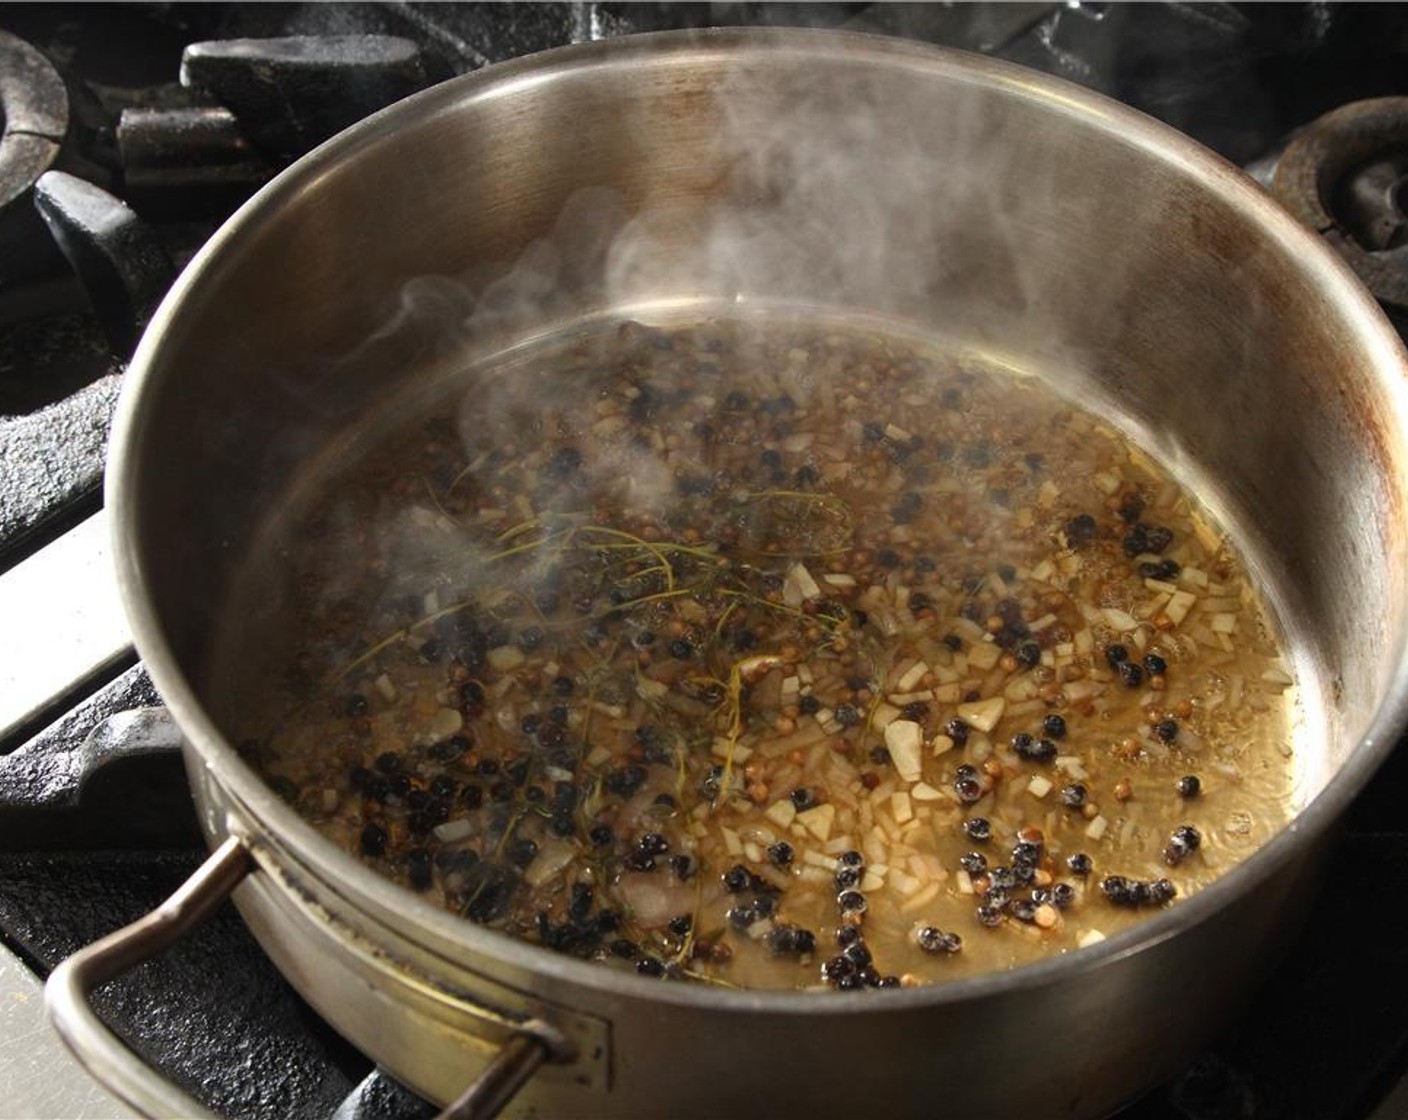 step 8 Combine the diced shallots with the White Wine (3 cups), Fresh Thyme (1 tsp), Black Peppercorns (1 tsp), and Whole Coriander Seeds (1 tsp) in a saucepan and reduce until nearly dry, should take about 15 minutes over low heat.